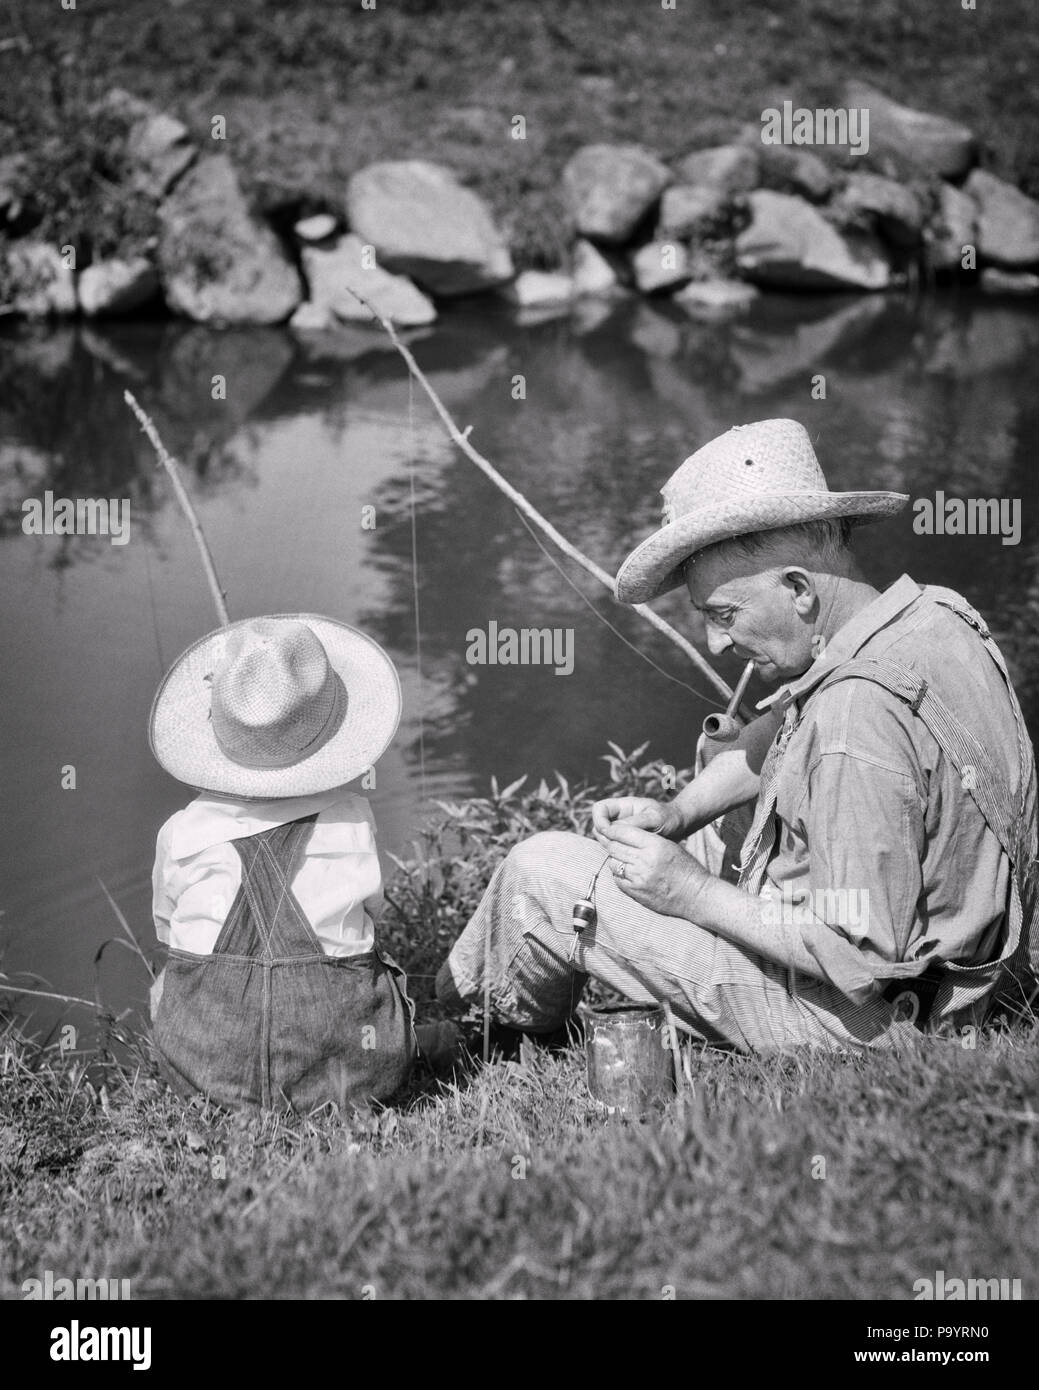 1930s GRANDFATHER AND GRANDSON WEARING STRAW HATS FISHING IN POND WITH STRING AND STICK RODS CAN OF WORMS FOR BAIT - a4685 HAR001 HARS GRANDFATHER GRANDPARENTS FAMILIES JOY LIFESTYLE ELDER GRANDPARENT RURAL HOME LIFE FRIENDSHIP HALF-LENGTH PERSONS MALES SENIOR MAN SENIOR ADULT B&W SUMMERTIME HAPPINESS OLDSTERS HIGH ANGLE OLDSTER ADVENTURE AND RECREATION YOUNG AND OLD ELDERS GRANDFATHERS GRANDSON ANGLING JUVENILES RODS TOGETHERNESS WORMS BAIT BLACK AND WHITE CAUCASIAN ETHNICITY GRANDPA HAR001 OLD FASHIONED Stock Photo